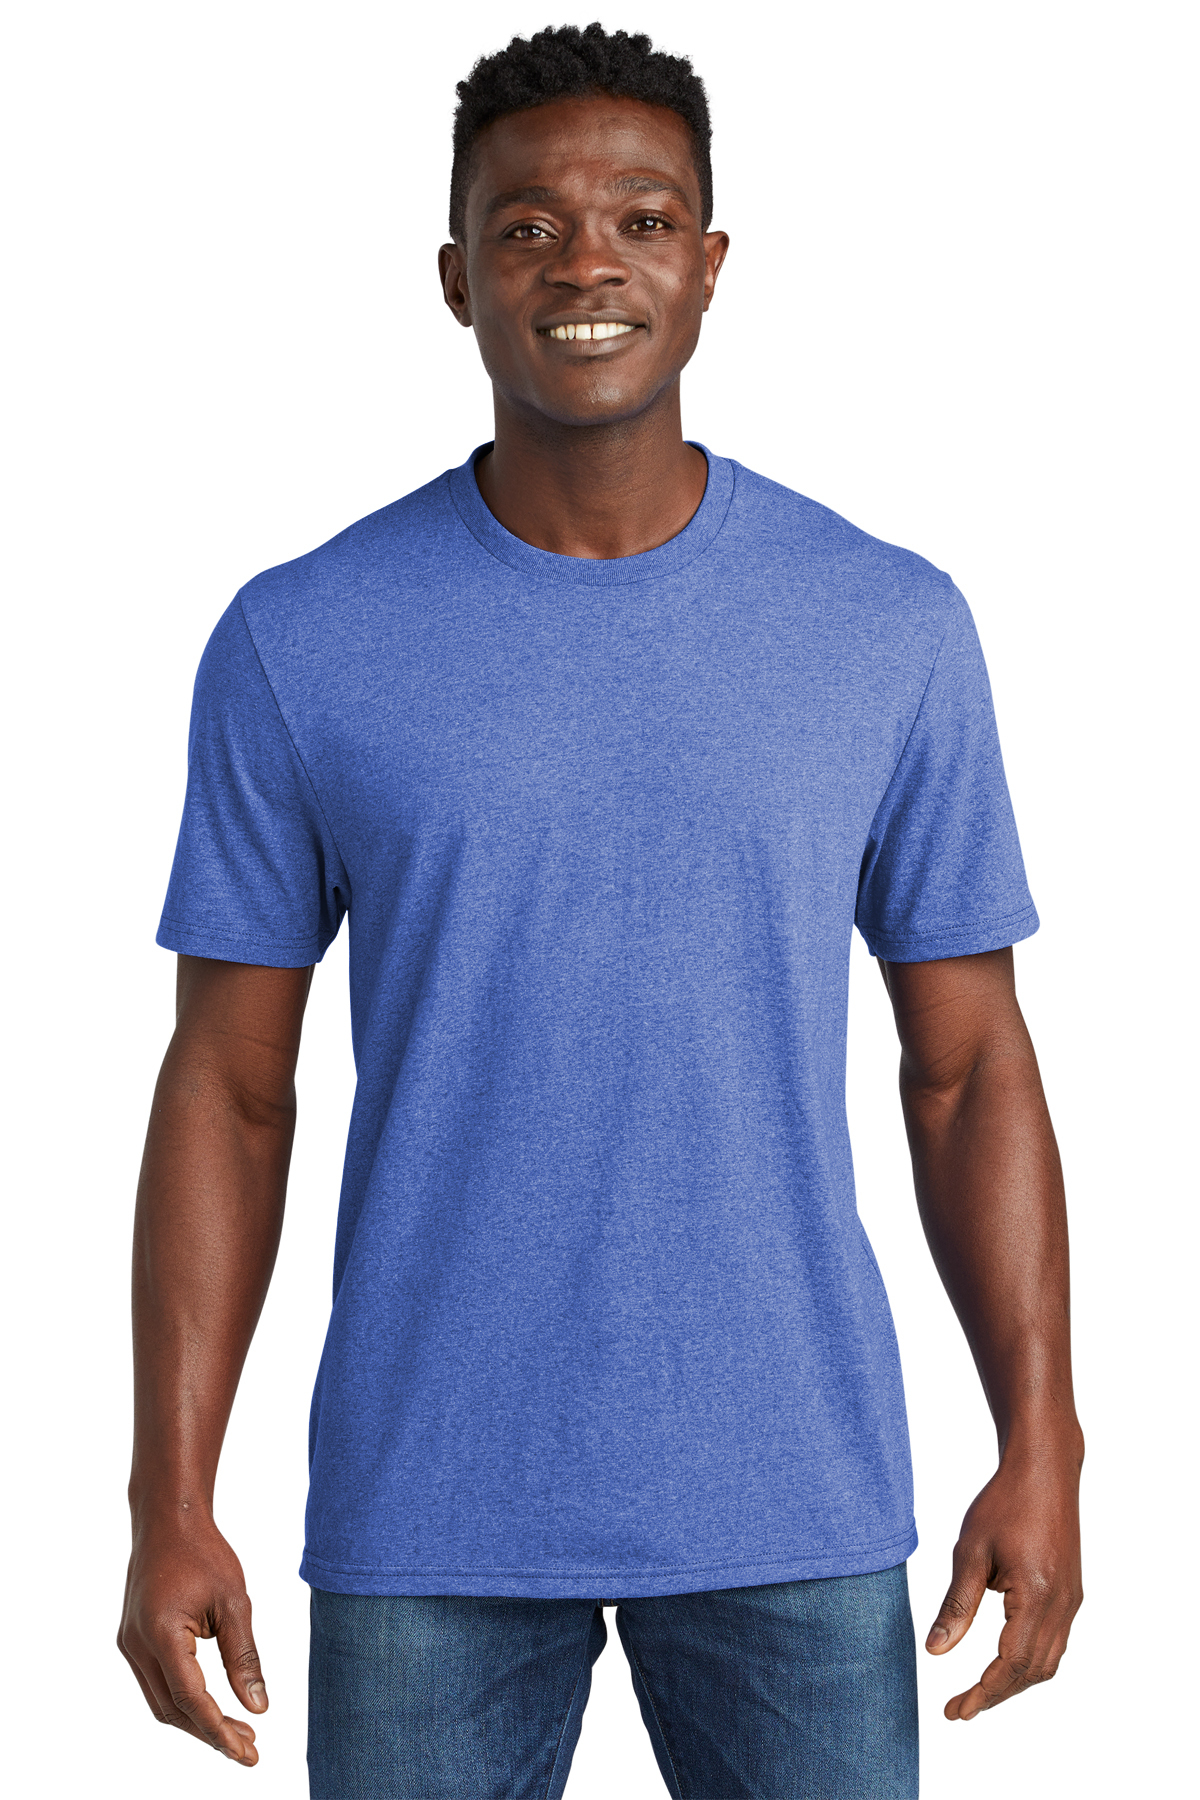 Allmade Unisex Recycled Blend Tee | Product | SanMar